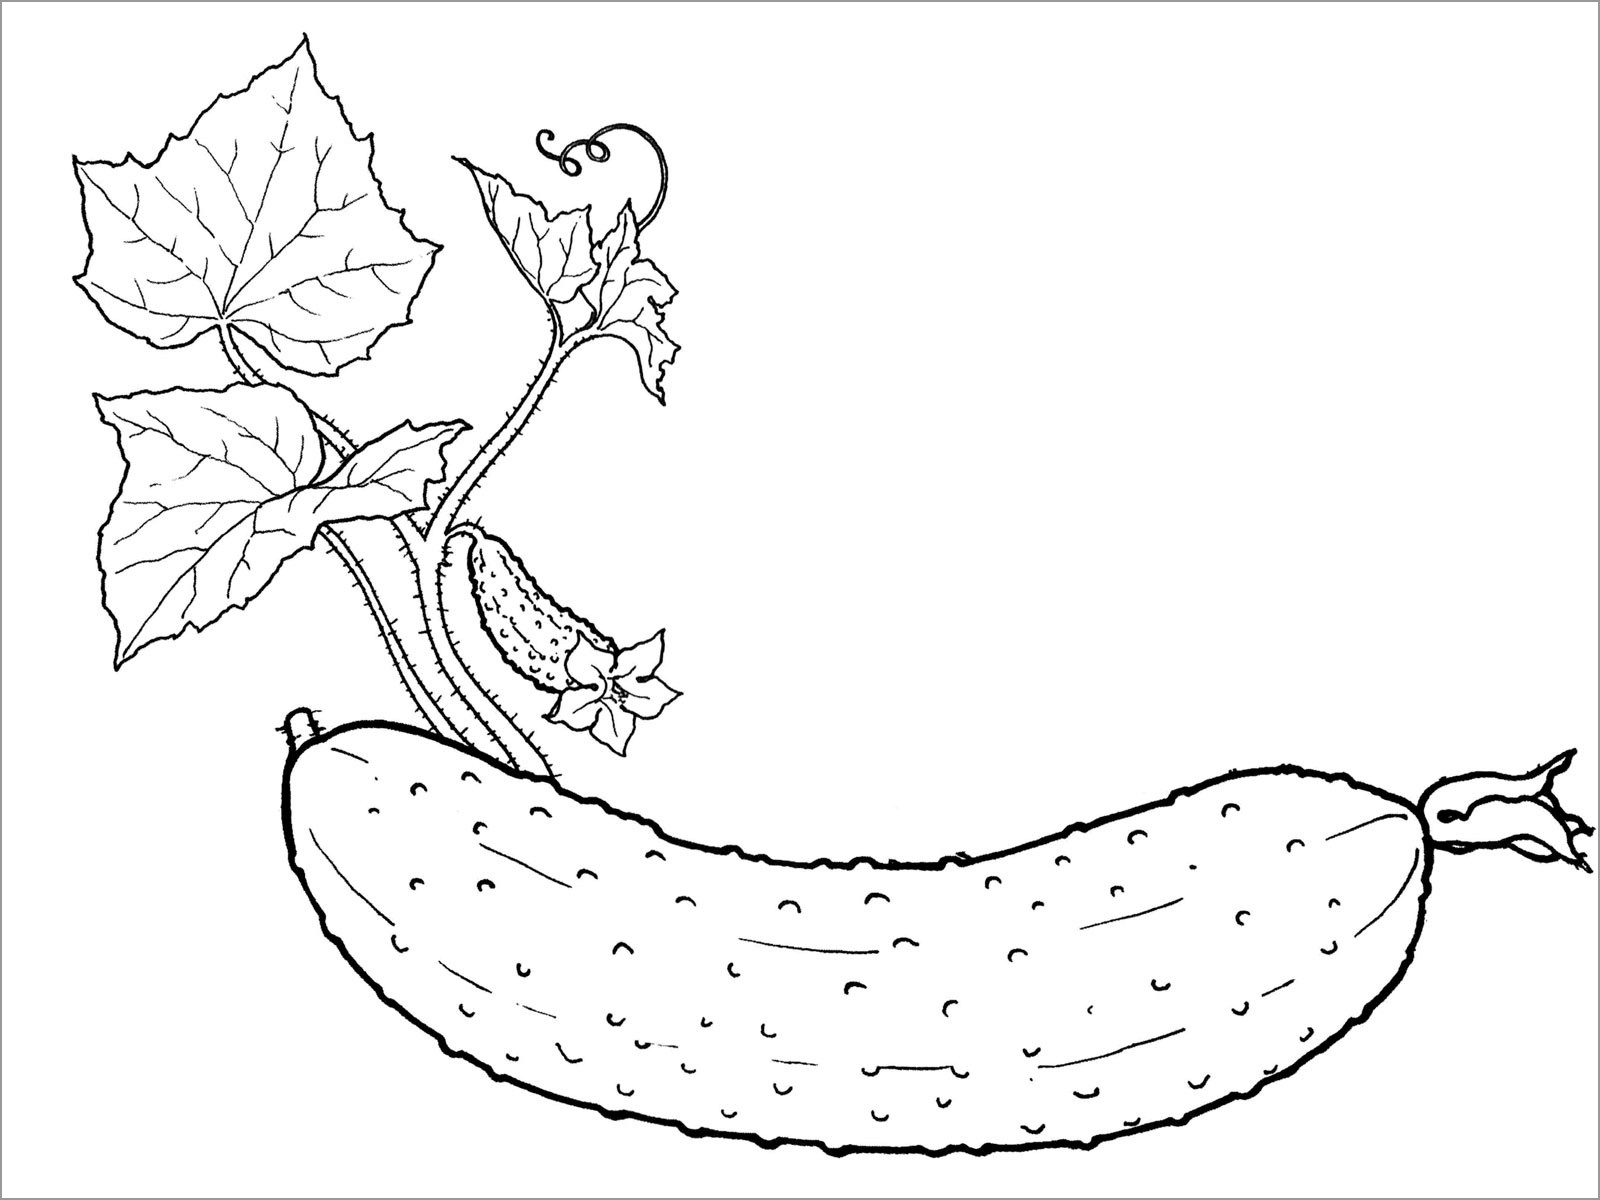 Cucumber Vines Coloring Page